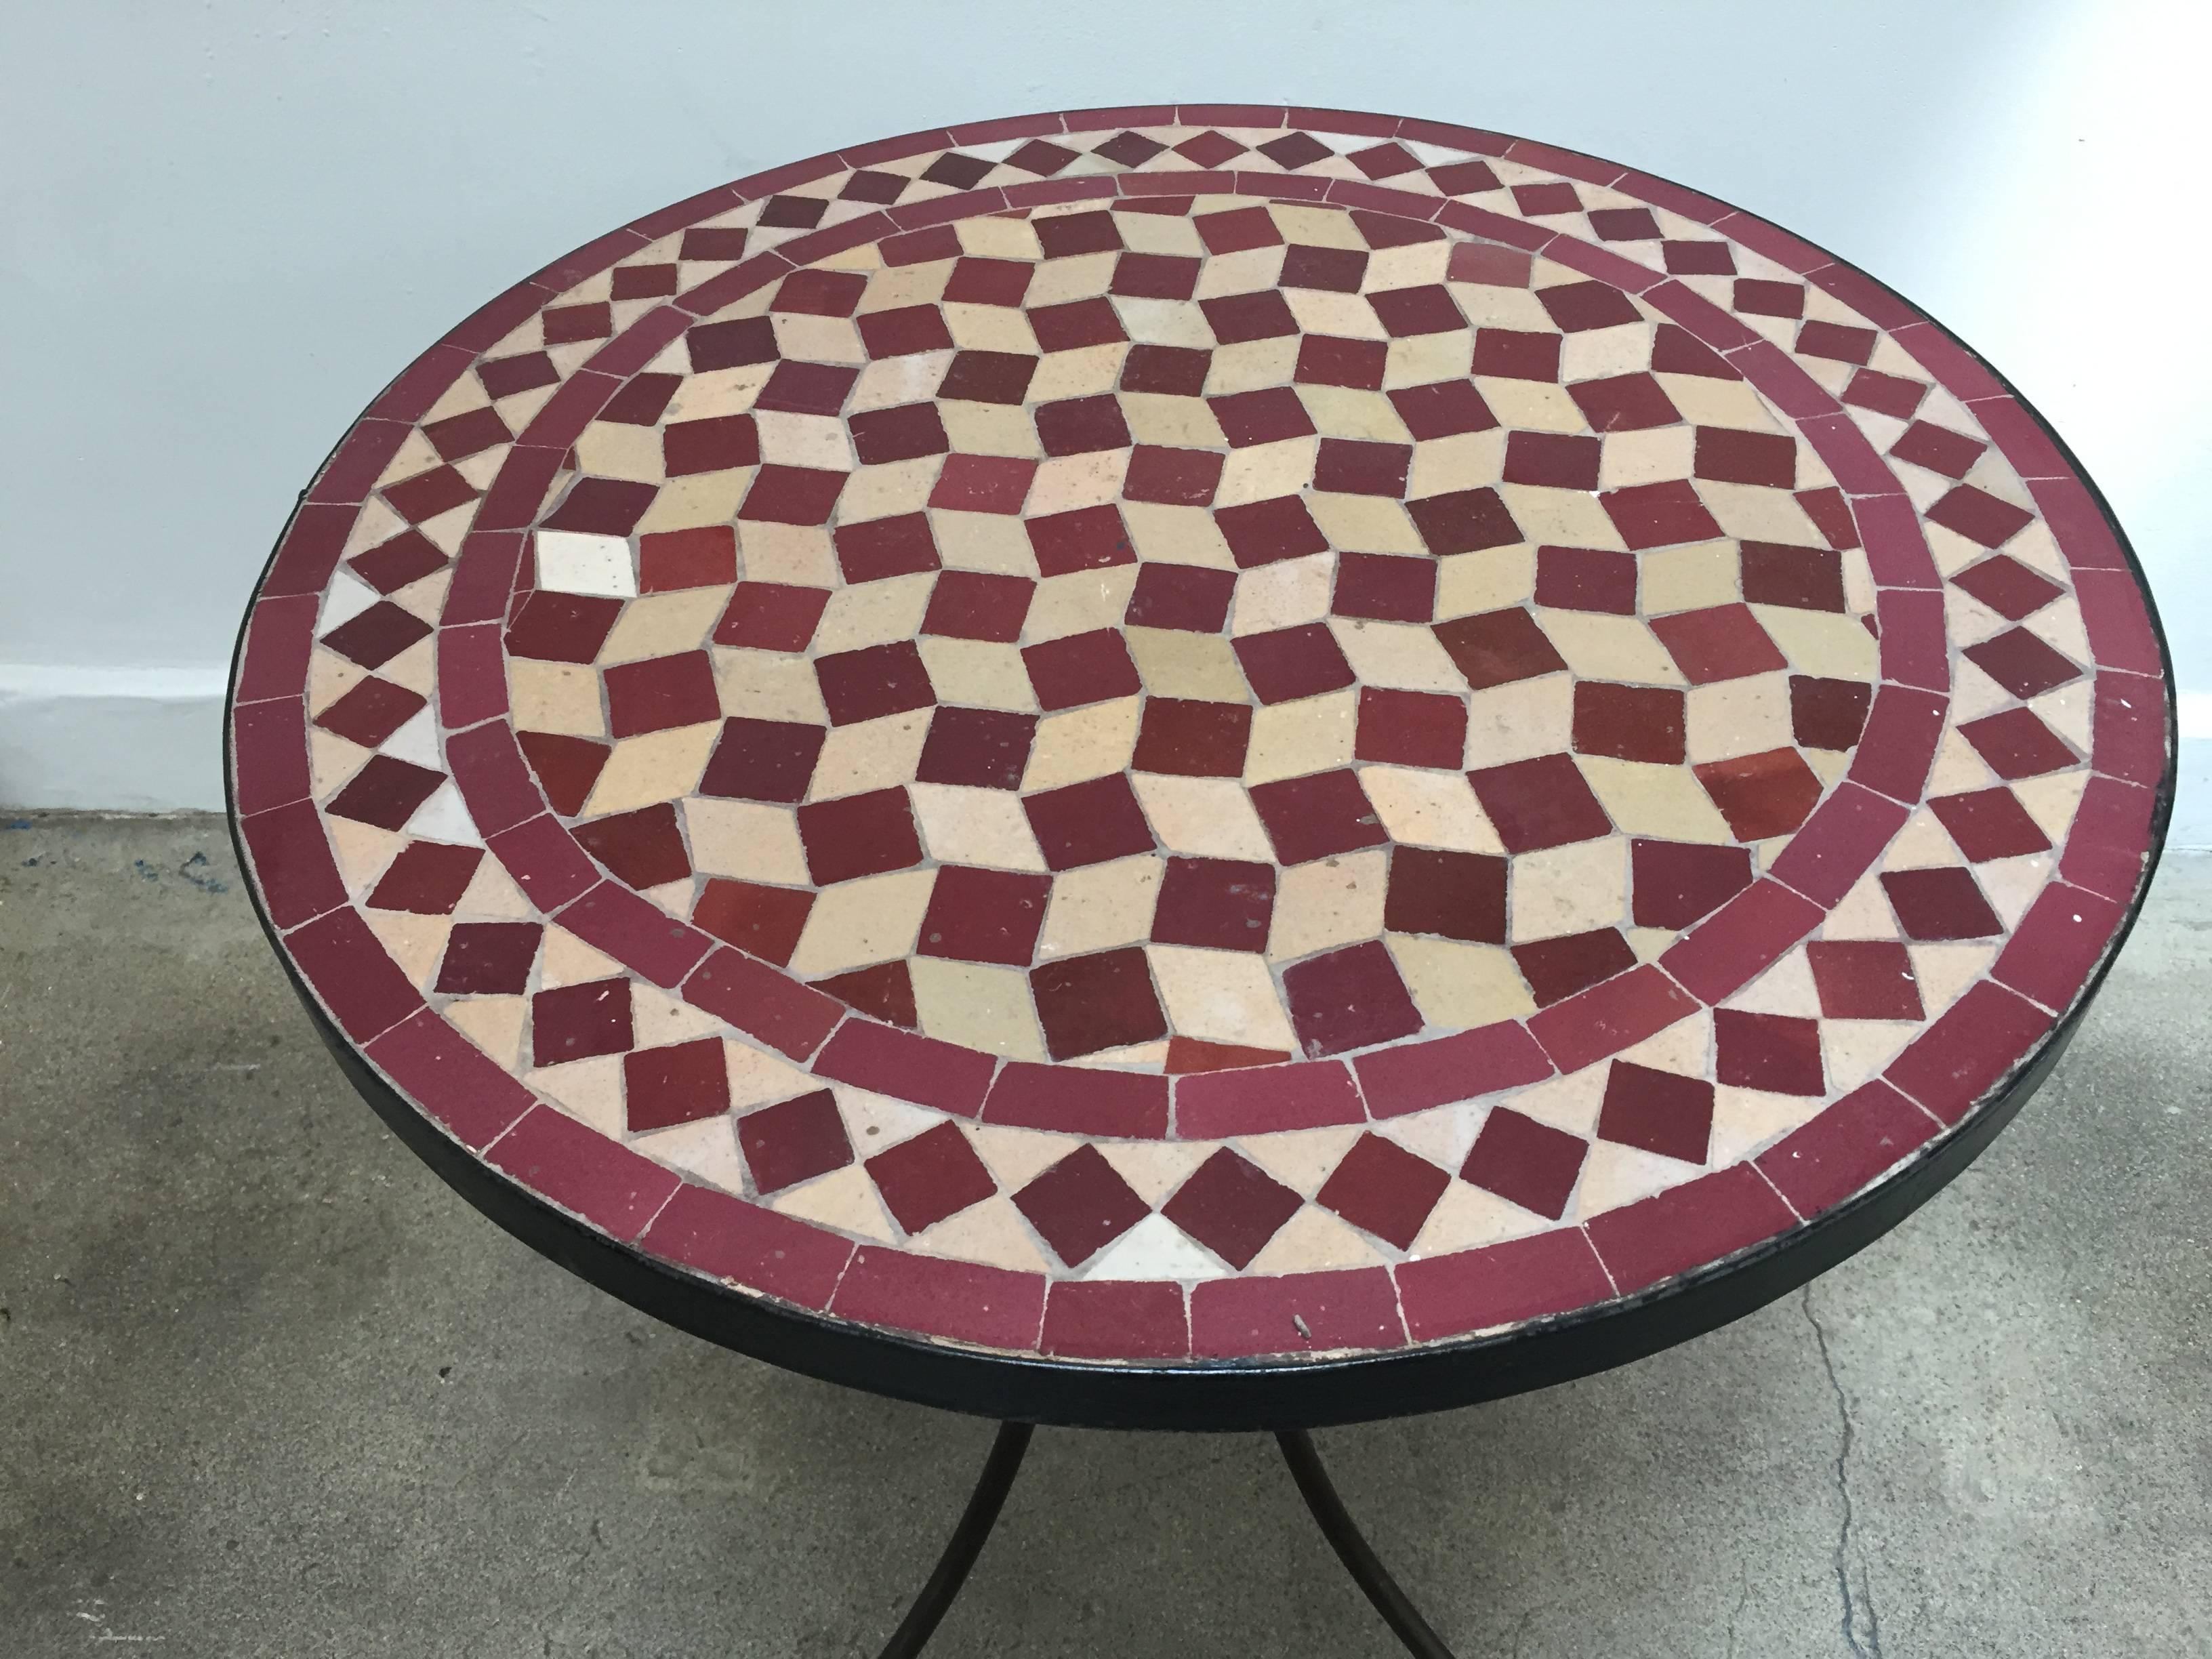 Hand-Crafted Moroccan Mosaic Side Table on Low Iron Base